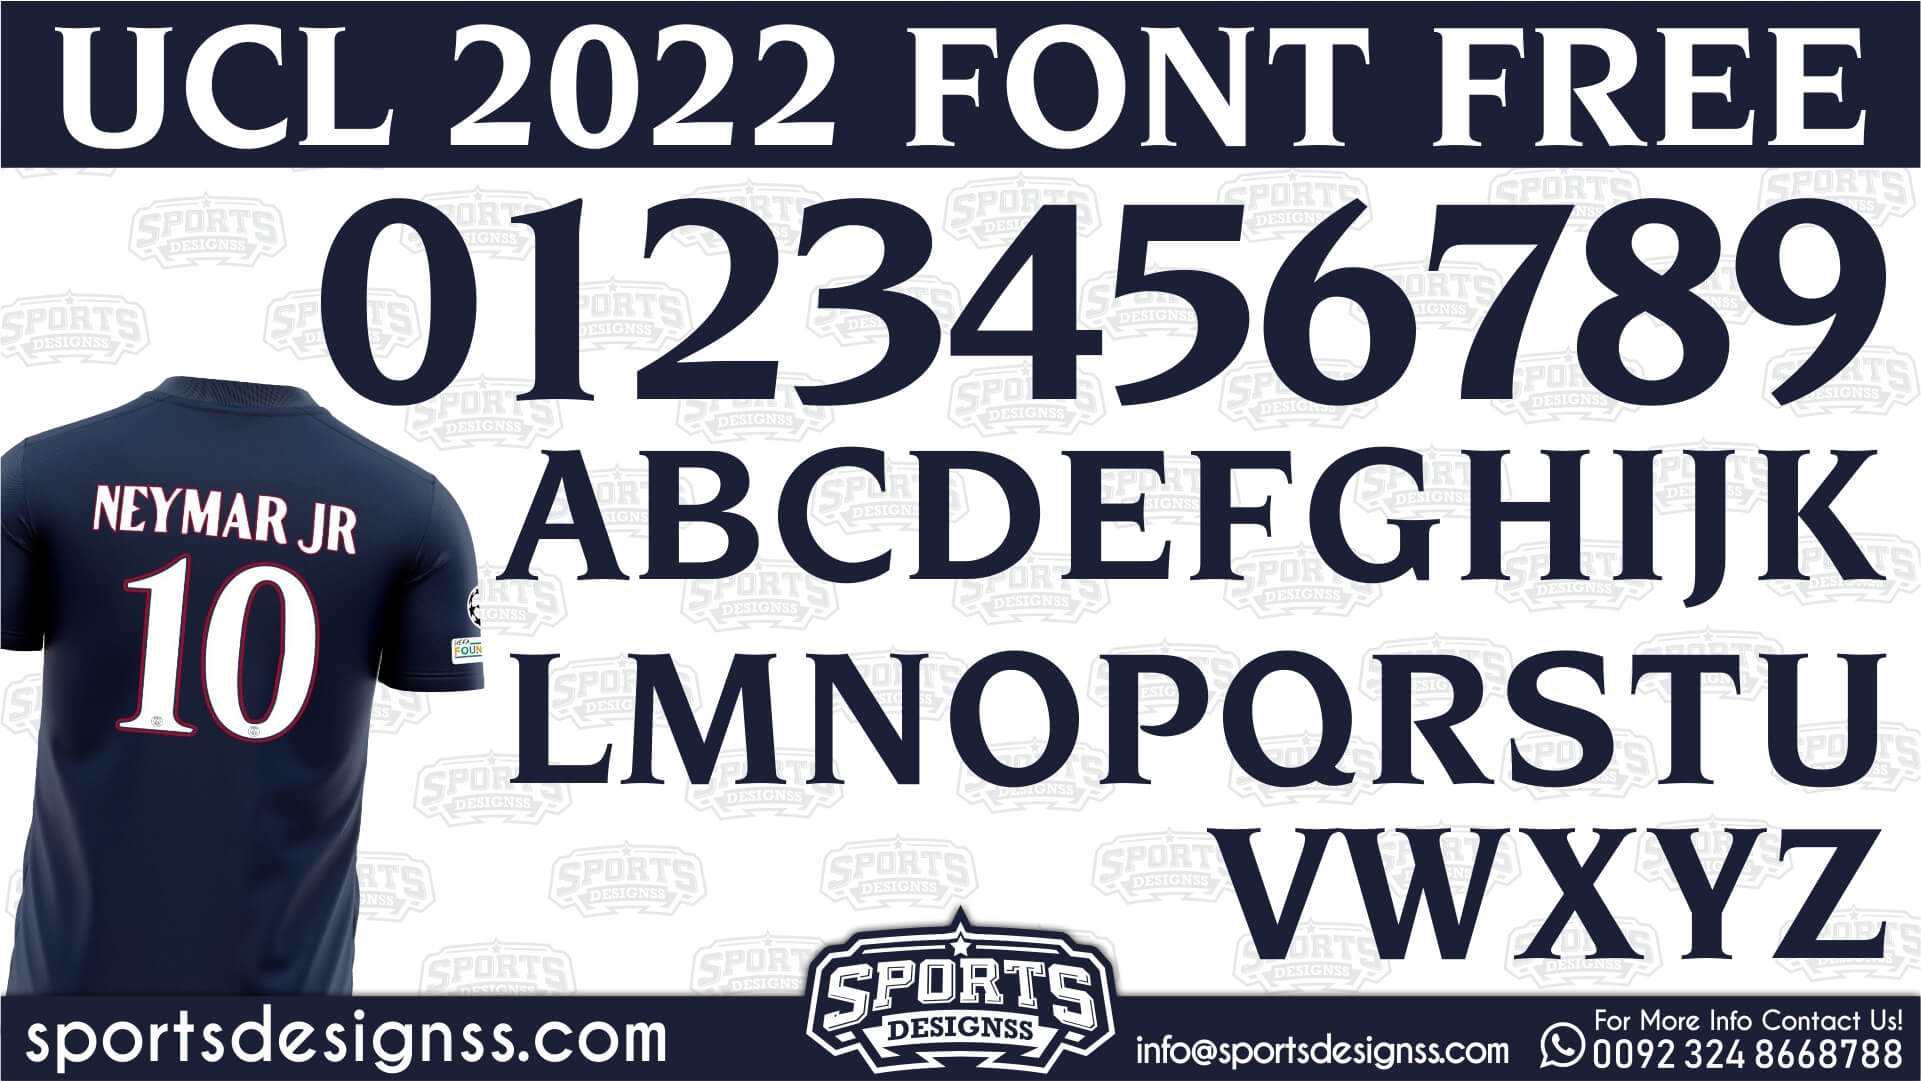 FREE DOWNLOAD: PSG UCL 2022-2023 Football Font by Sports Designss_PSG  UCL Font Free Download PSG UCL 2022-2023 Font Football Font Free Download by Sports Designss_Download Sao Paulo Font for free